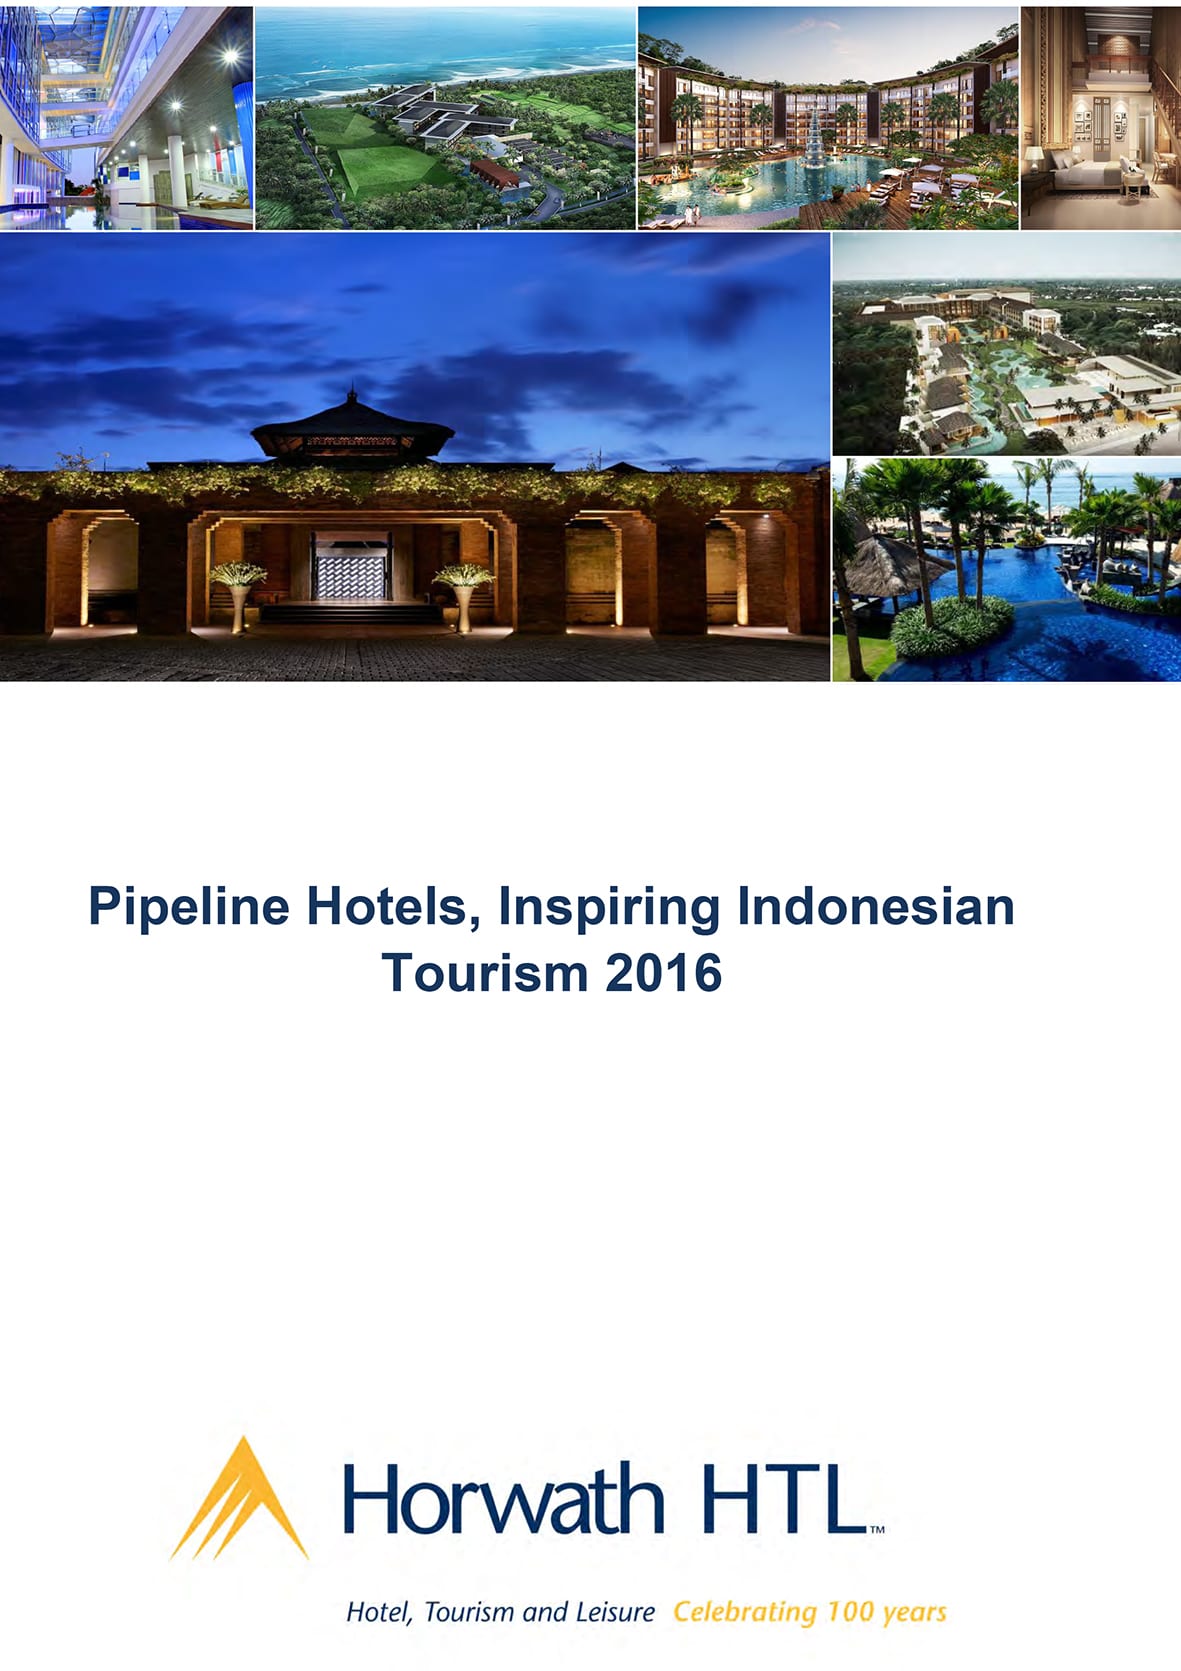 Pipeline Hotels 161115 updated 1